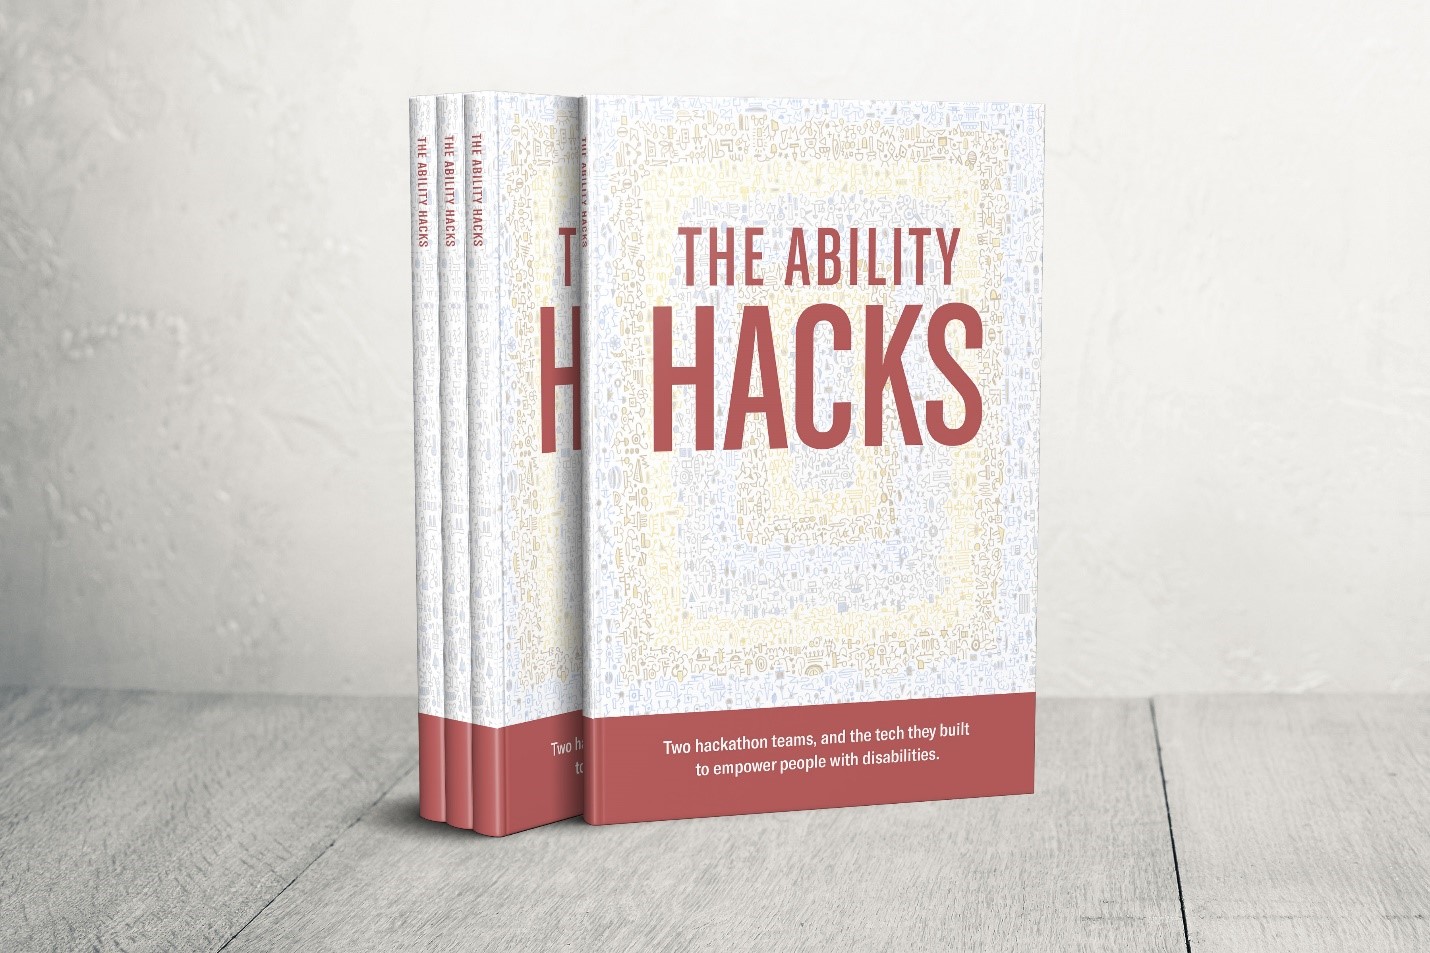 Das Buch mit dem Titel "The Ability Hacks - Two hackathon teams, and the tech they built to empower people with disabilities"